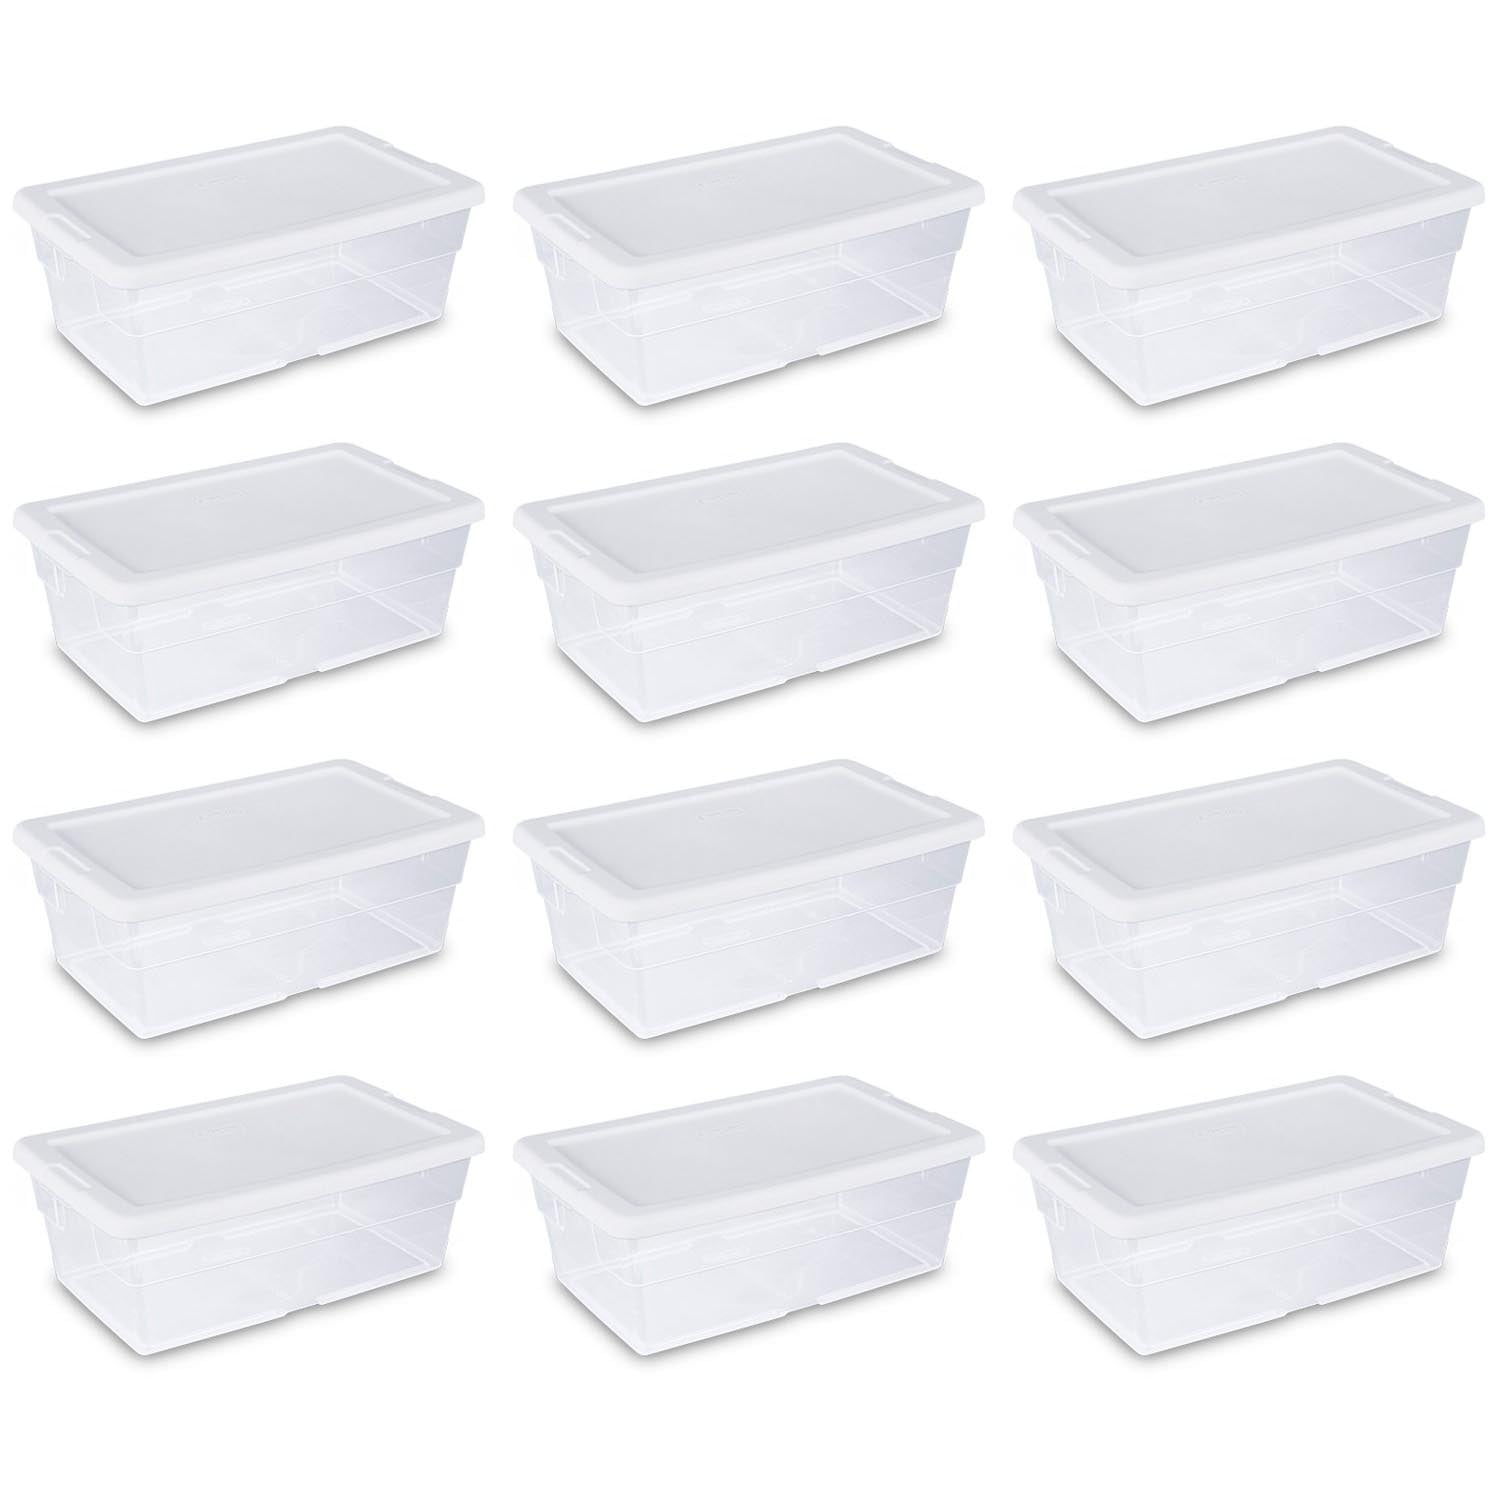 20 Pack Shoe Storage Boxes Plastic Bin with Lid Stackable Design Container Clear